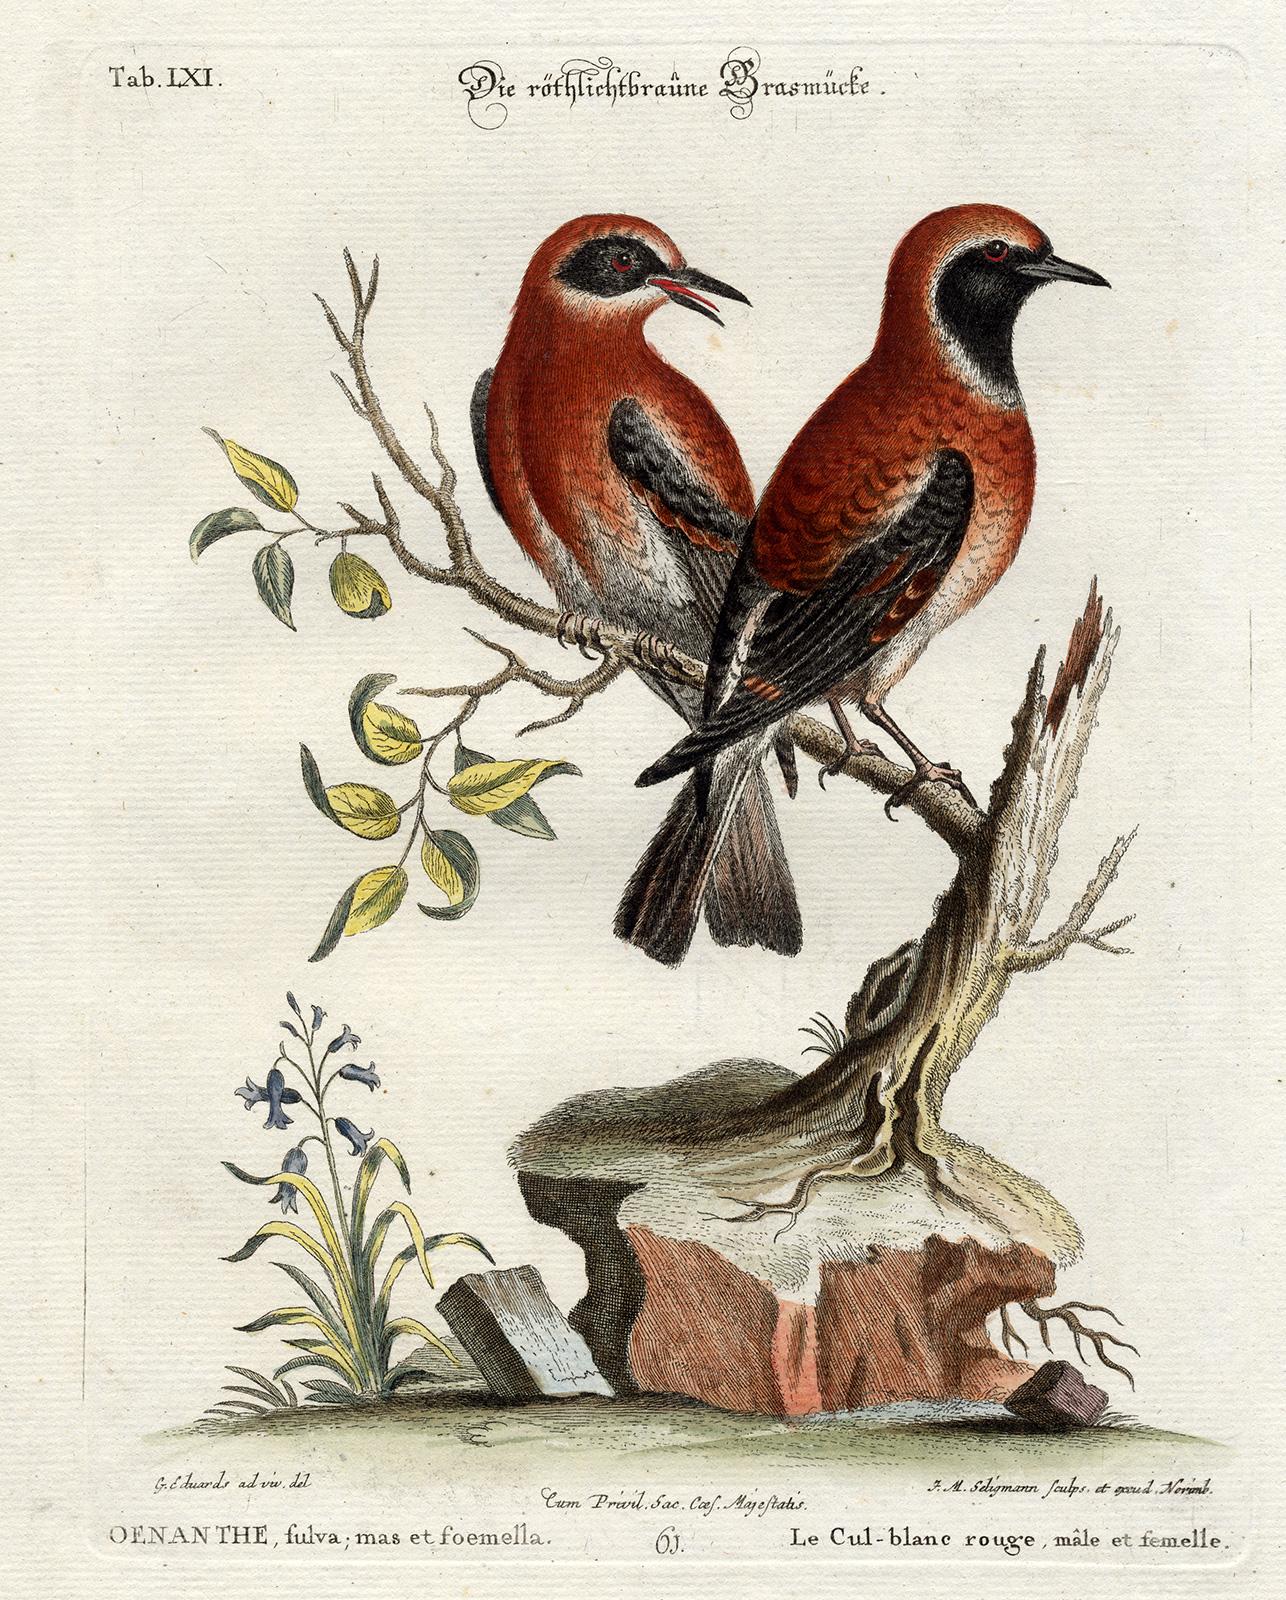 Red Warbler by Seligmann - Handcoloured etching - 18th century - Print by Johann Michael Seligmann